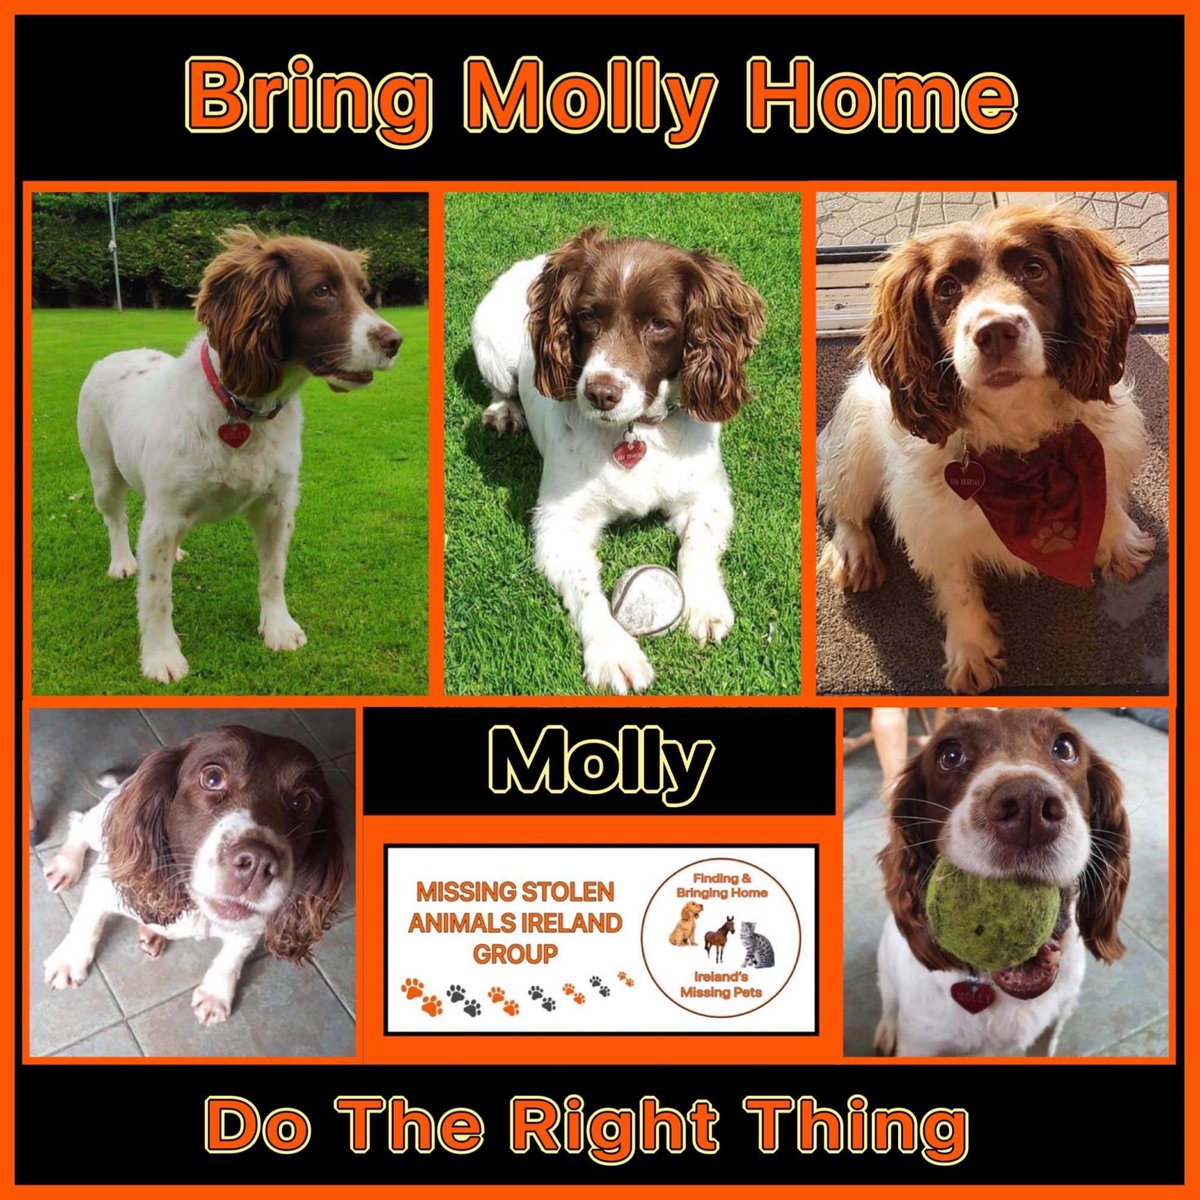 It’s coming up to 3 yrs since Molly was #stolen - July 17th 2020. She is believed to have been trafficked to the UK- She is still #MISSING #bringmollyhome #springerspaniel @TipperaryLive @KianEichholz @Cappawhite1 @cappawhitegaa @CappawhiteLFC @SAMPAuk_ @DogLostUK @DogsTrust